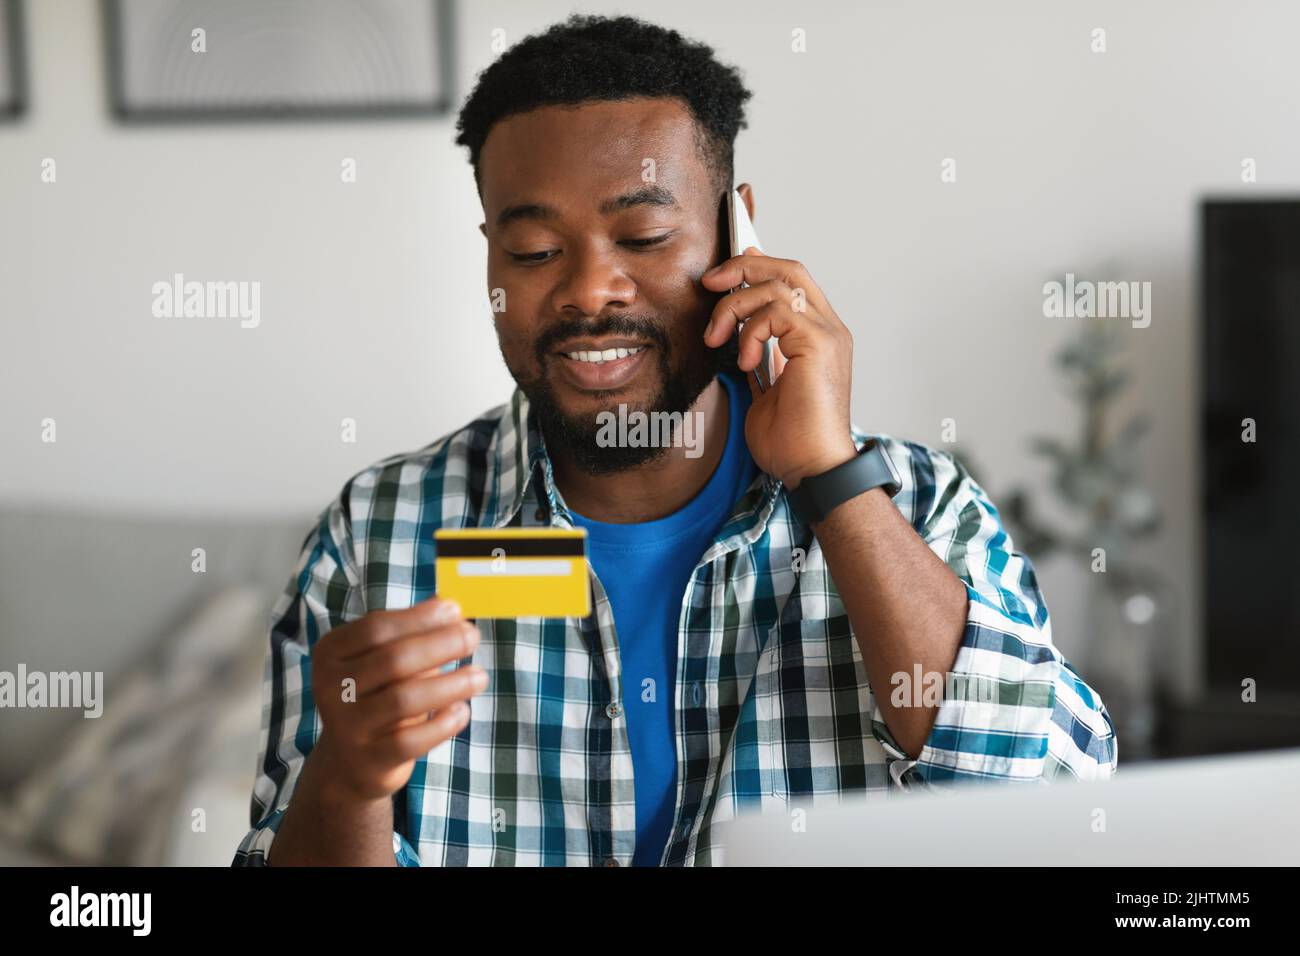 African Man Holding Credit Card Talking On Cellphone At Workplace Stockfoto